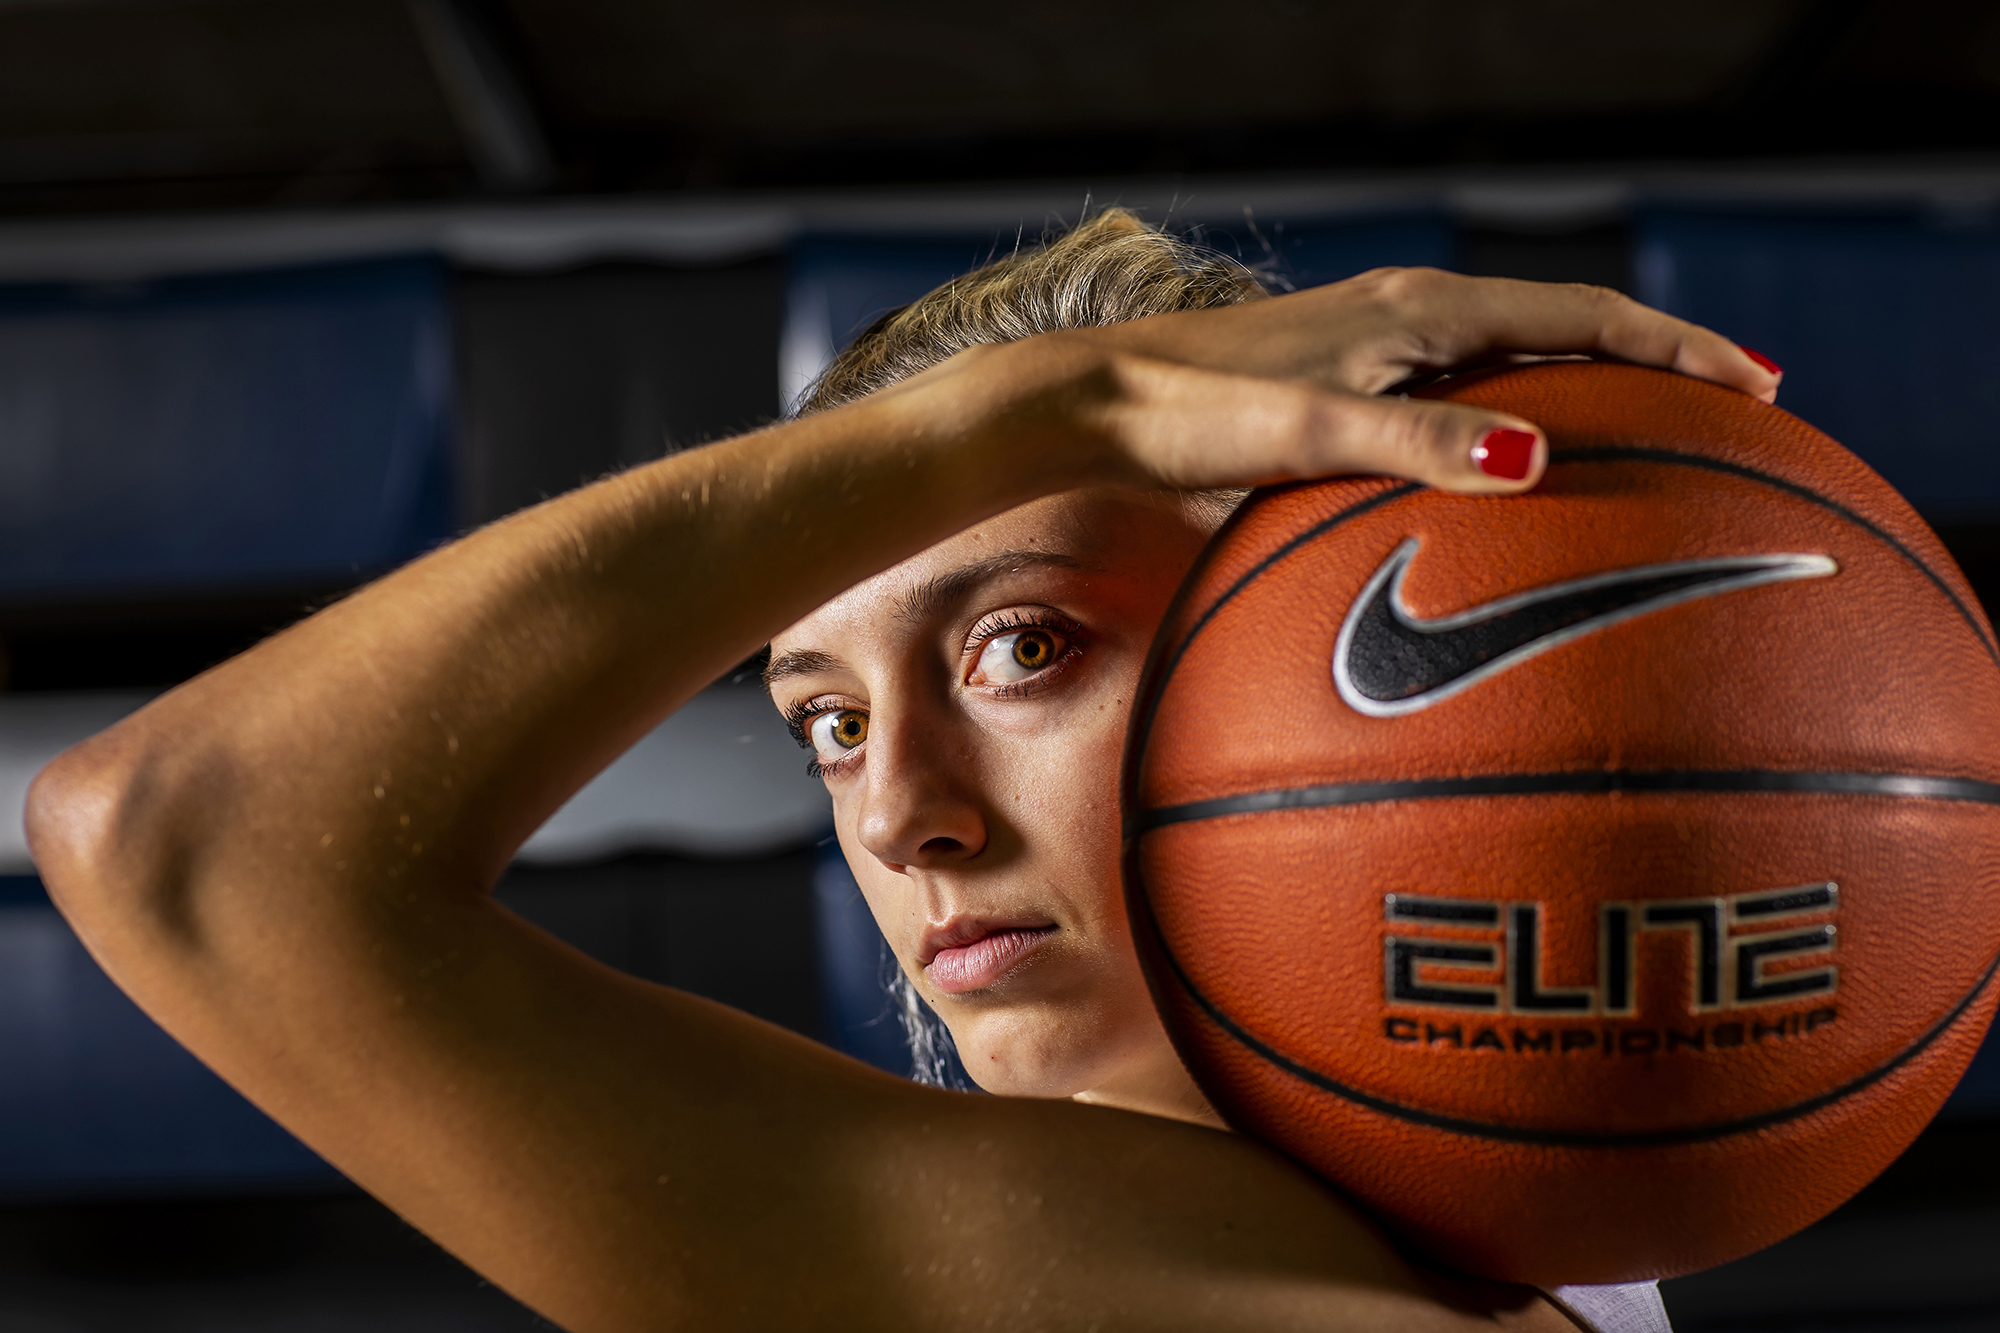 Kendall Grasela of the women's basketball team poses at the Palestra with a ball resting on her shoulder.